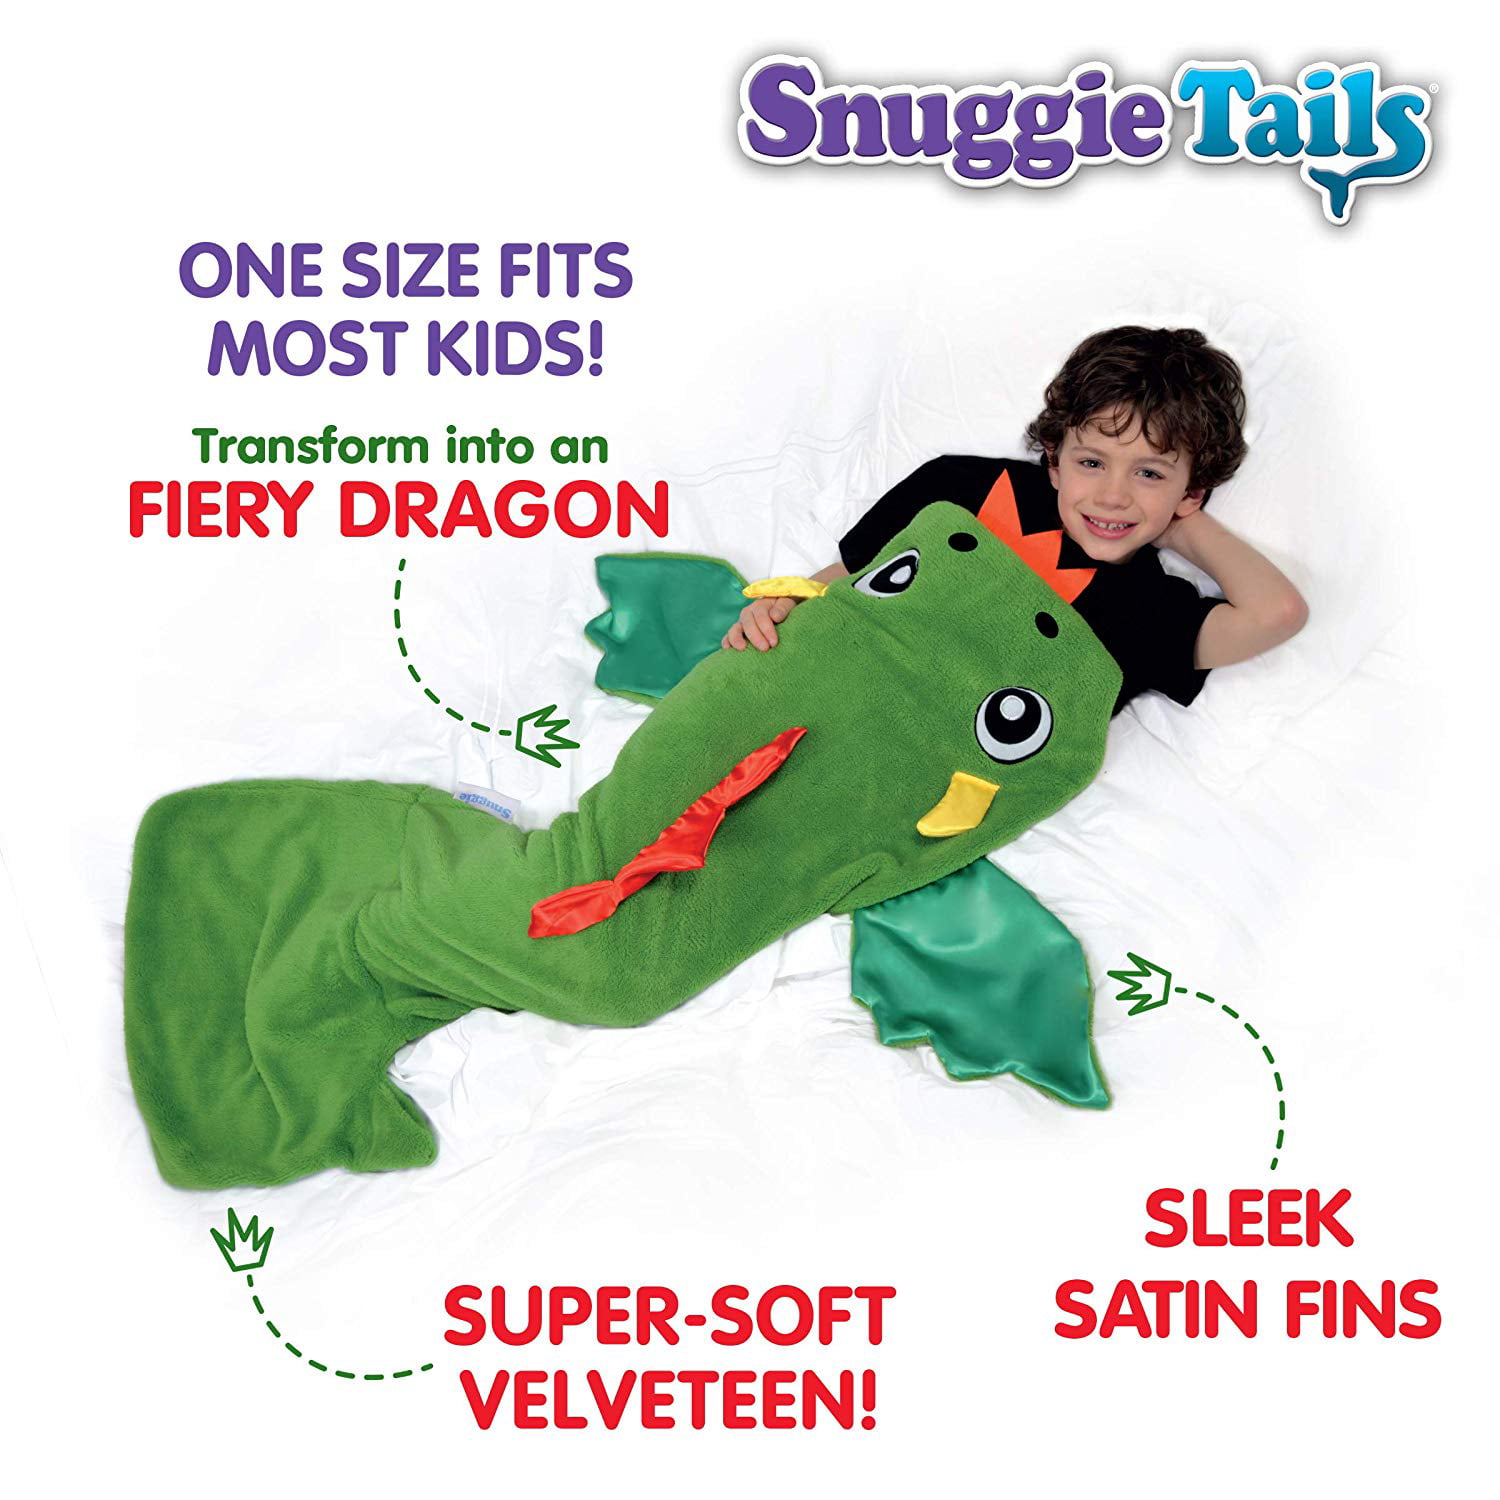 Snuggie Tails Dragon Kids Blanket Green Cozy Soft As Seen on TV ~ NEW *FAST SHIP 